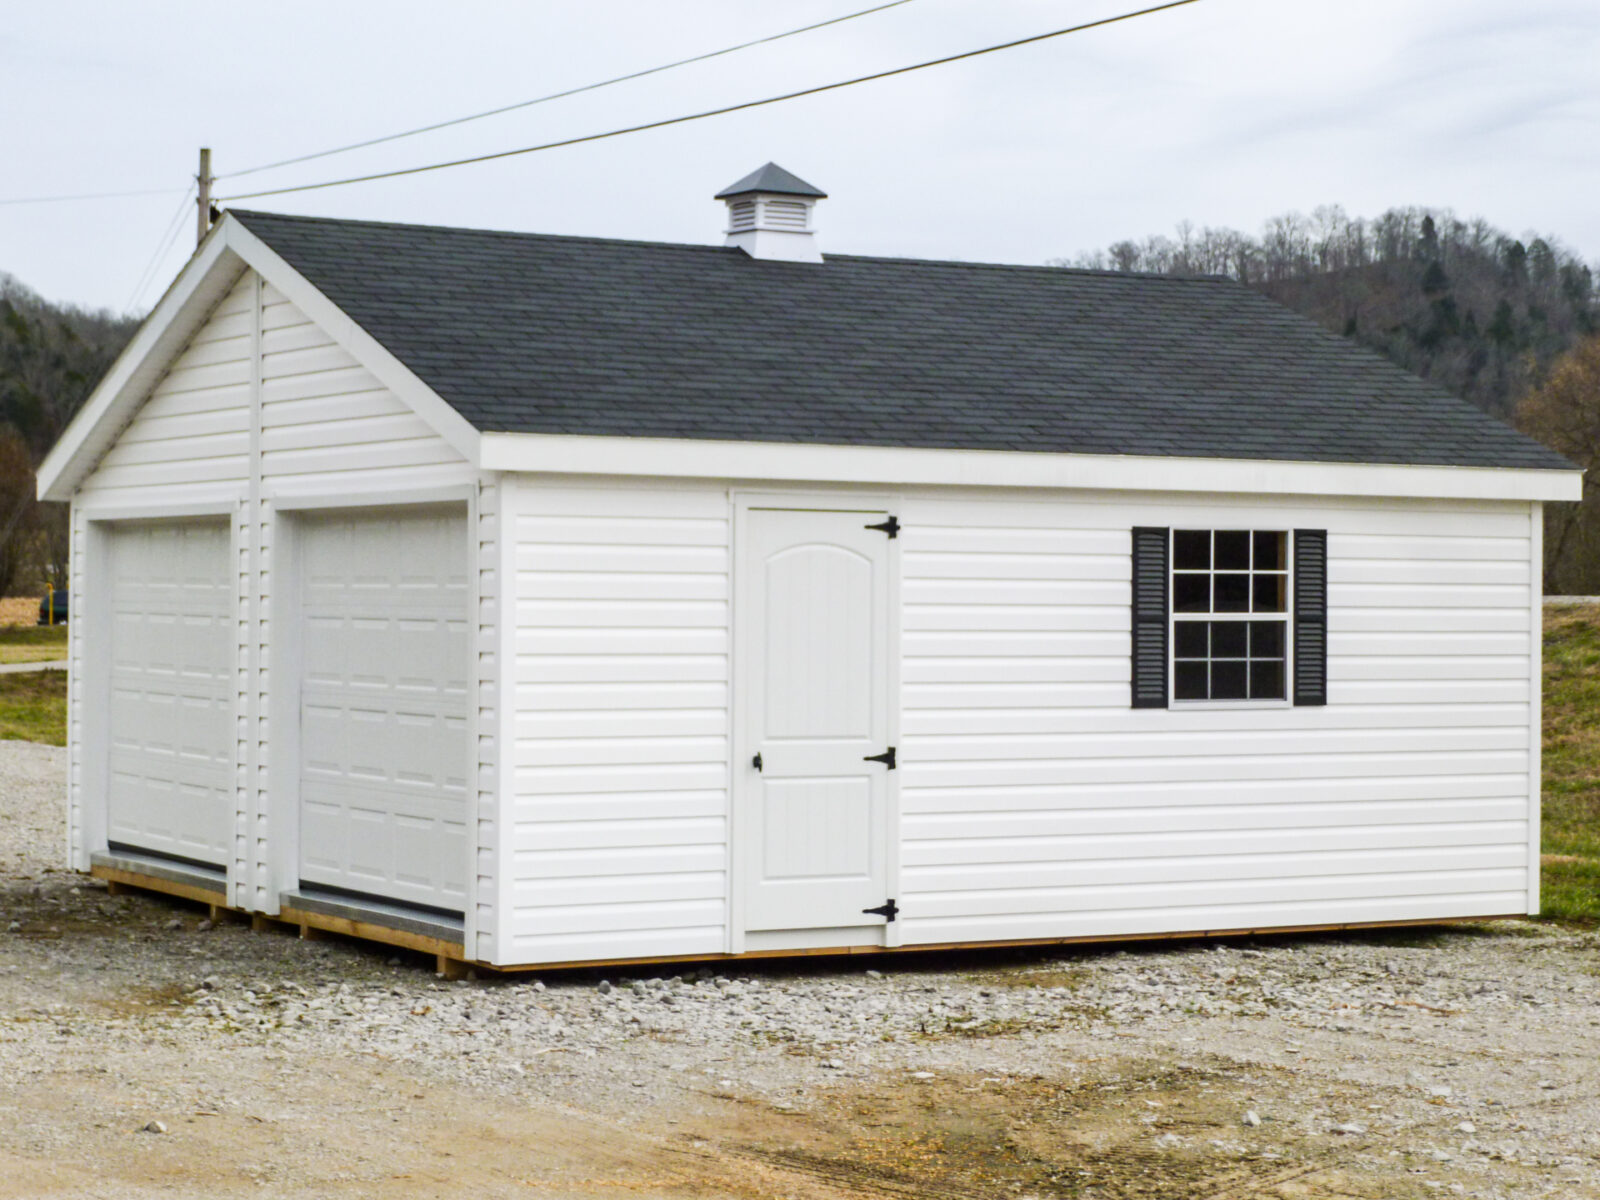 garages for sale in ky